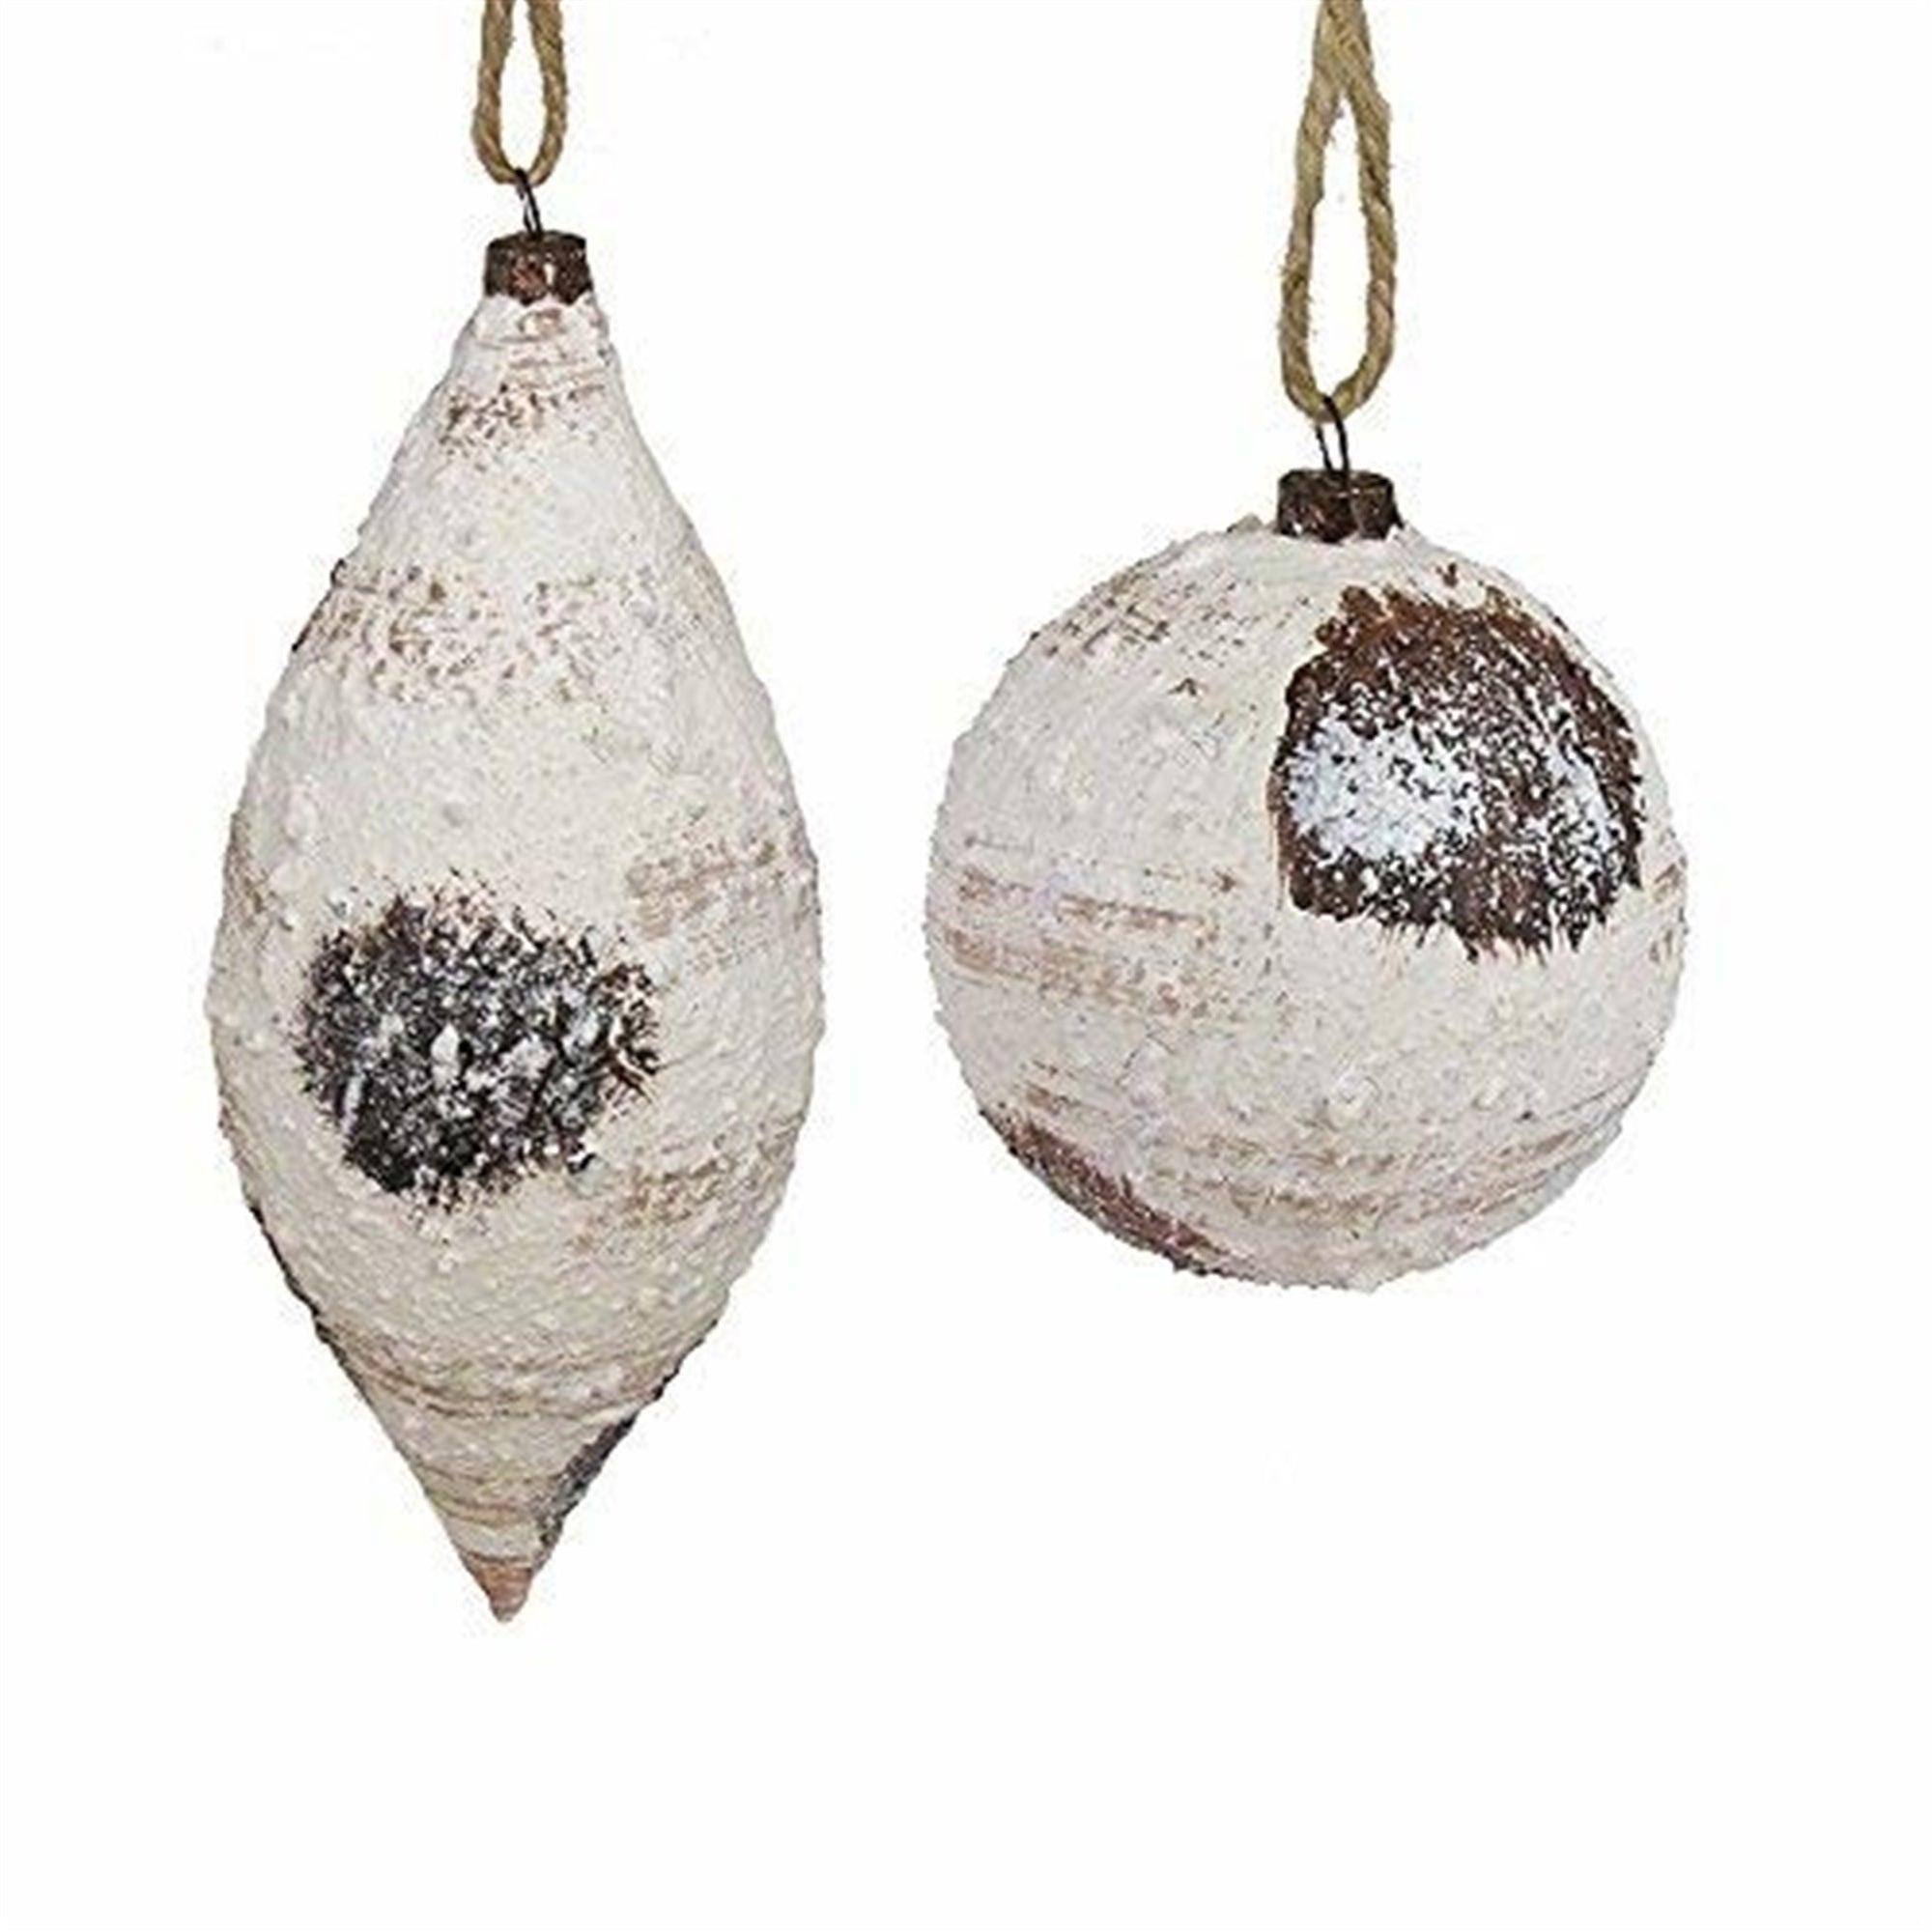 Kurt Adler Brown and White Ball and Teardrop Ornaments (Pack of 2)